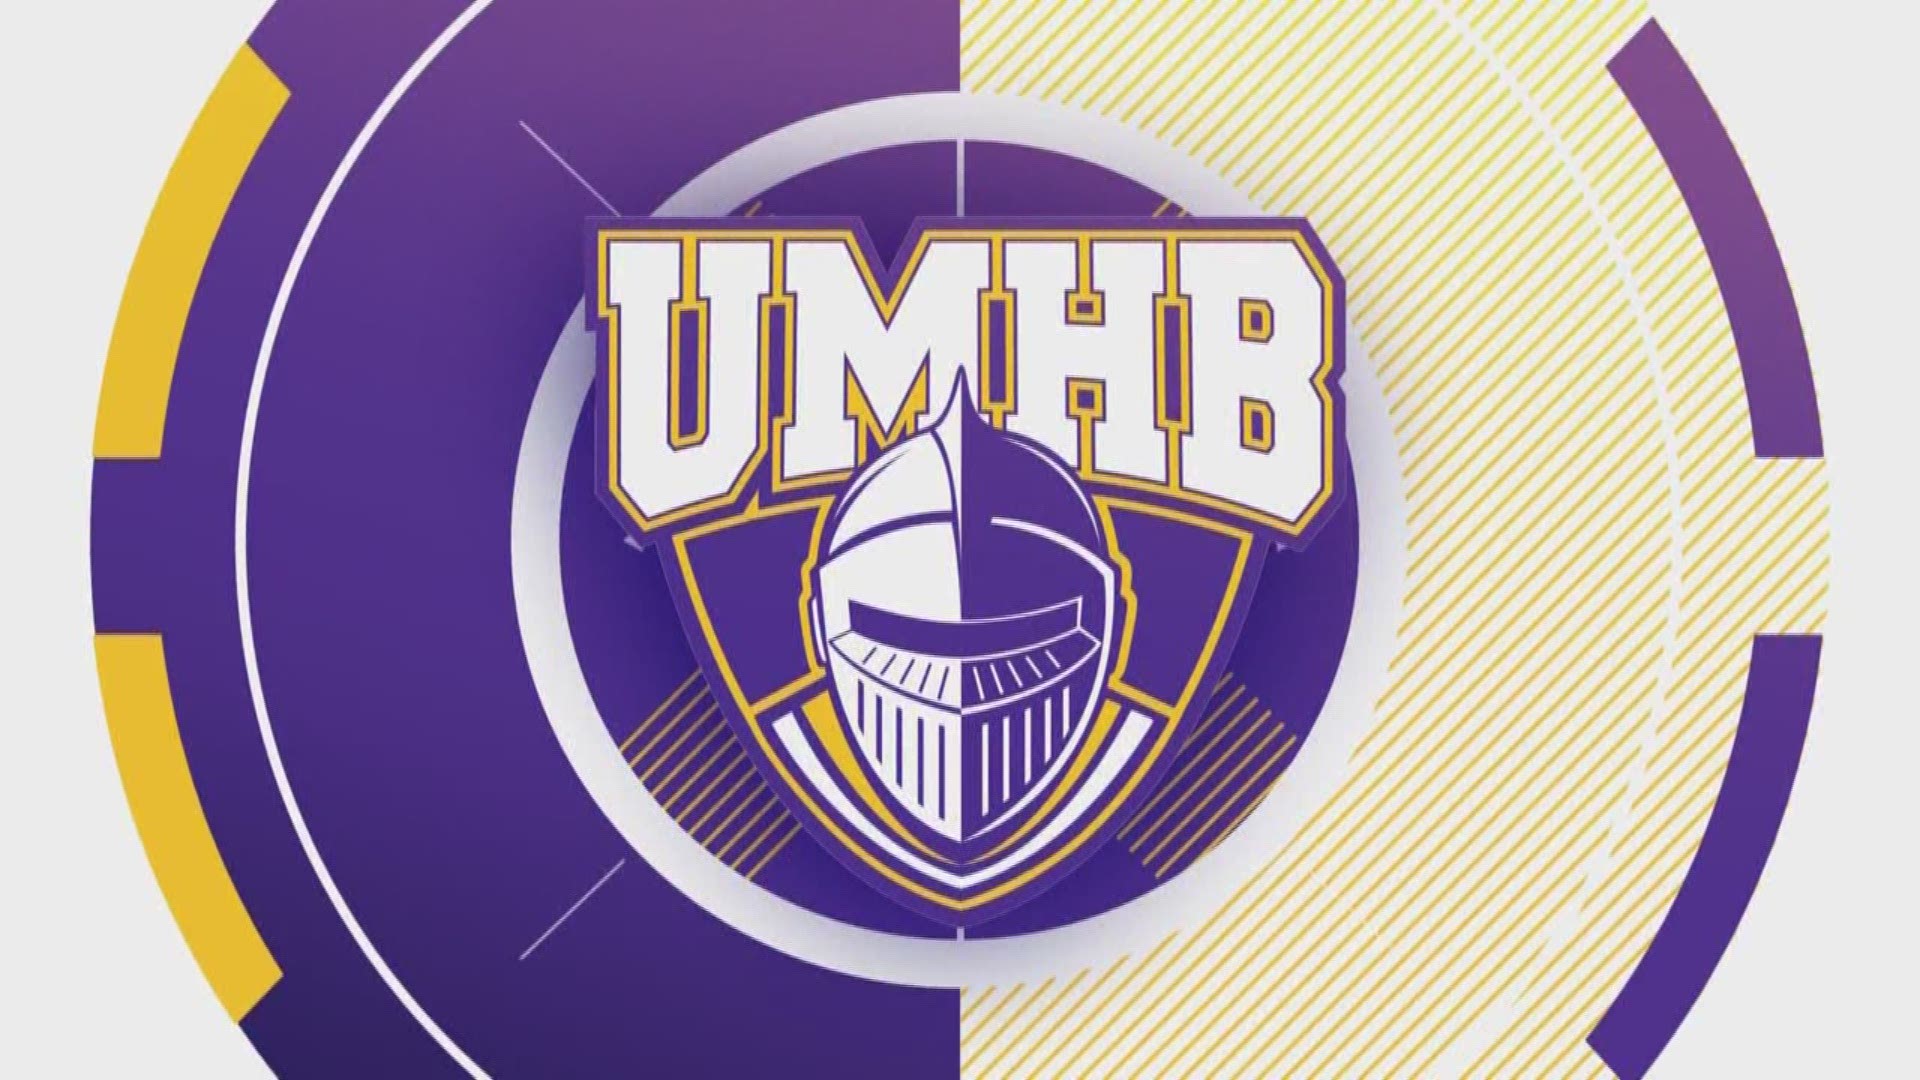 For the first time in school history UMHB women’s basketball brought home an American Southwest tournament championship.